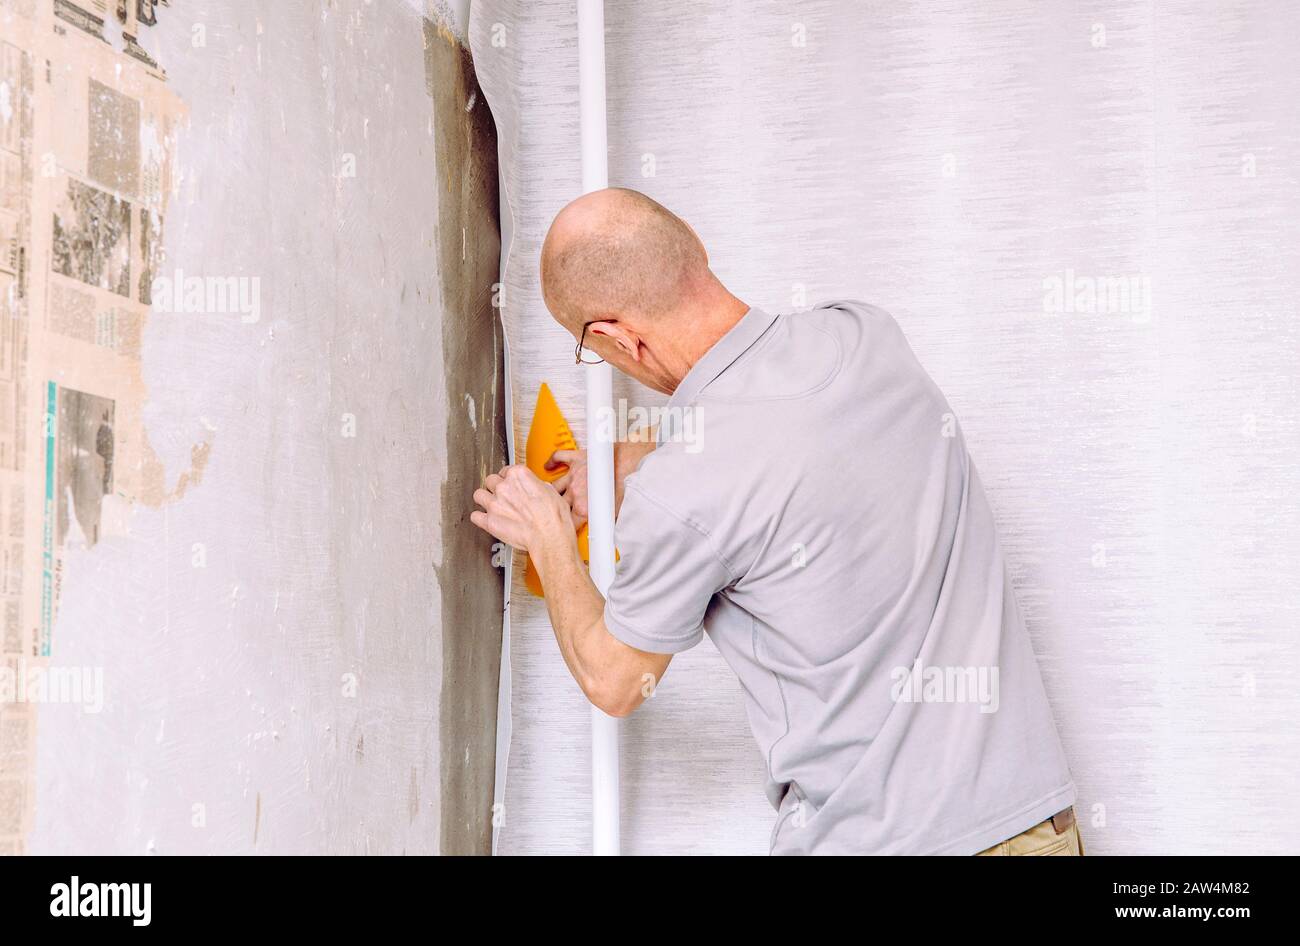 Adhesive Wallpaper Glue Applying Using Roller Close Up Photo. Worker  Installing New Modern Vinyl Wallpapers Stock Photo - Alamy